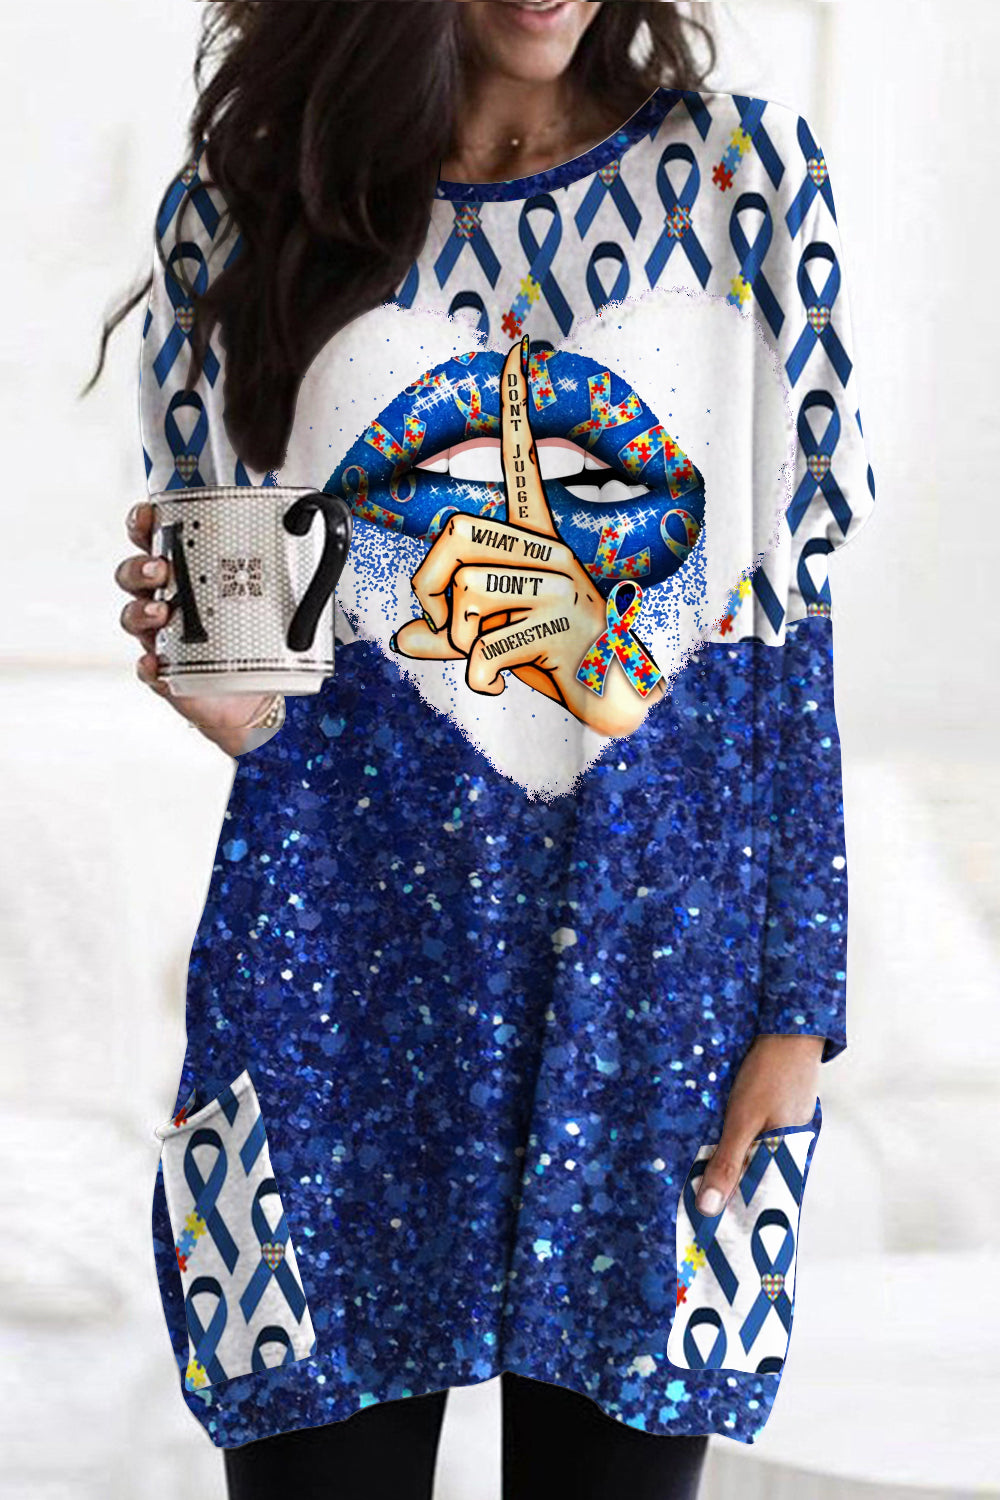 Don't Jugde What You Don't Understand Print Tunic with Pockets